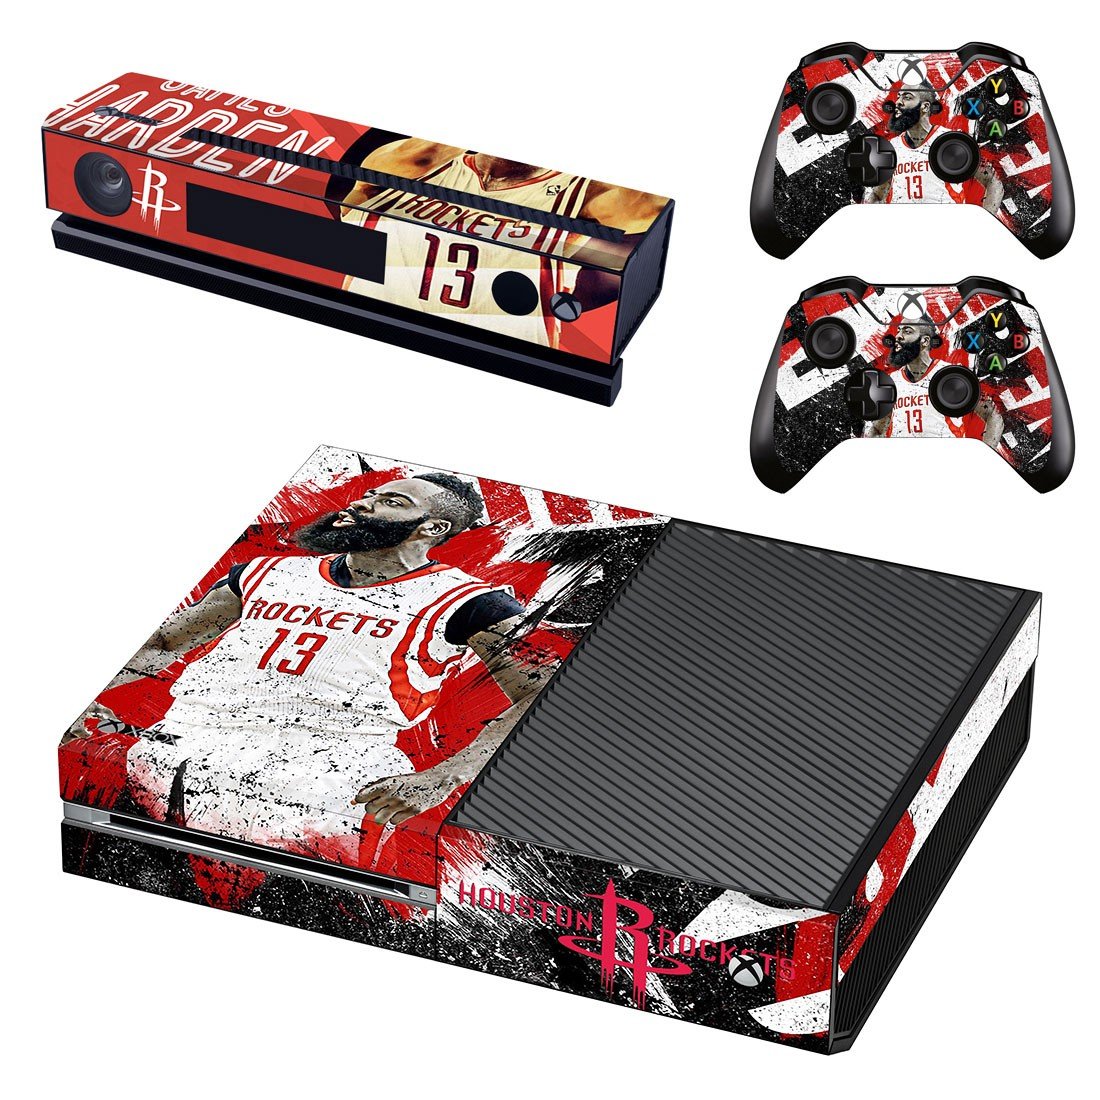 Lebron James Sticker For Xbox One And Controllers